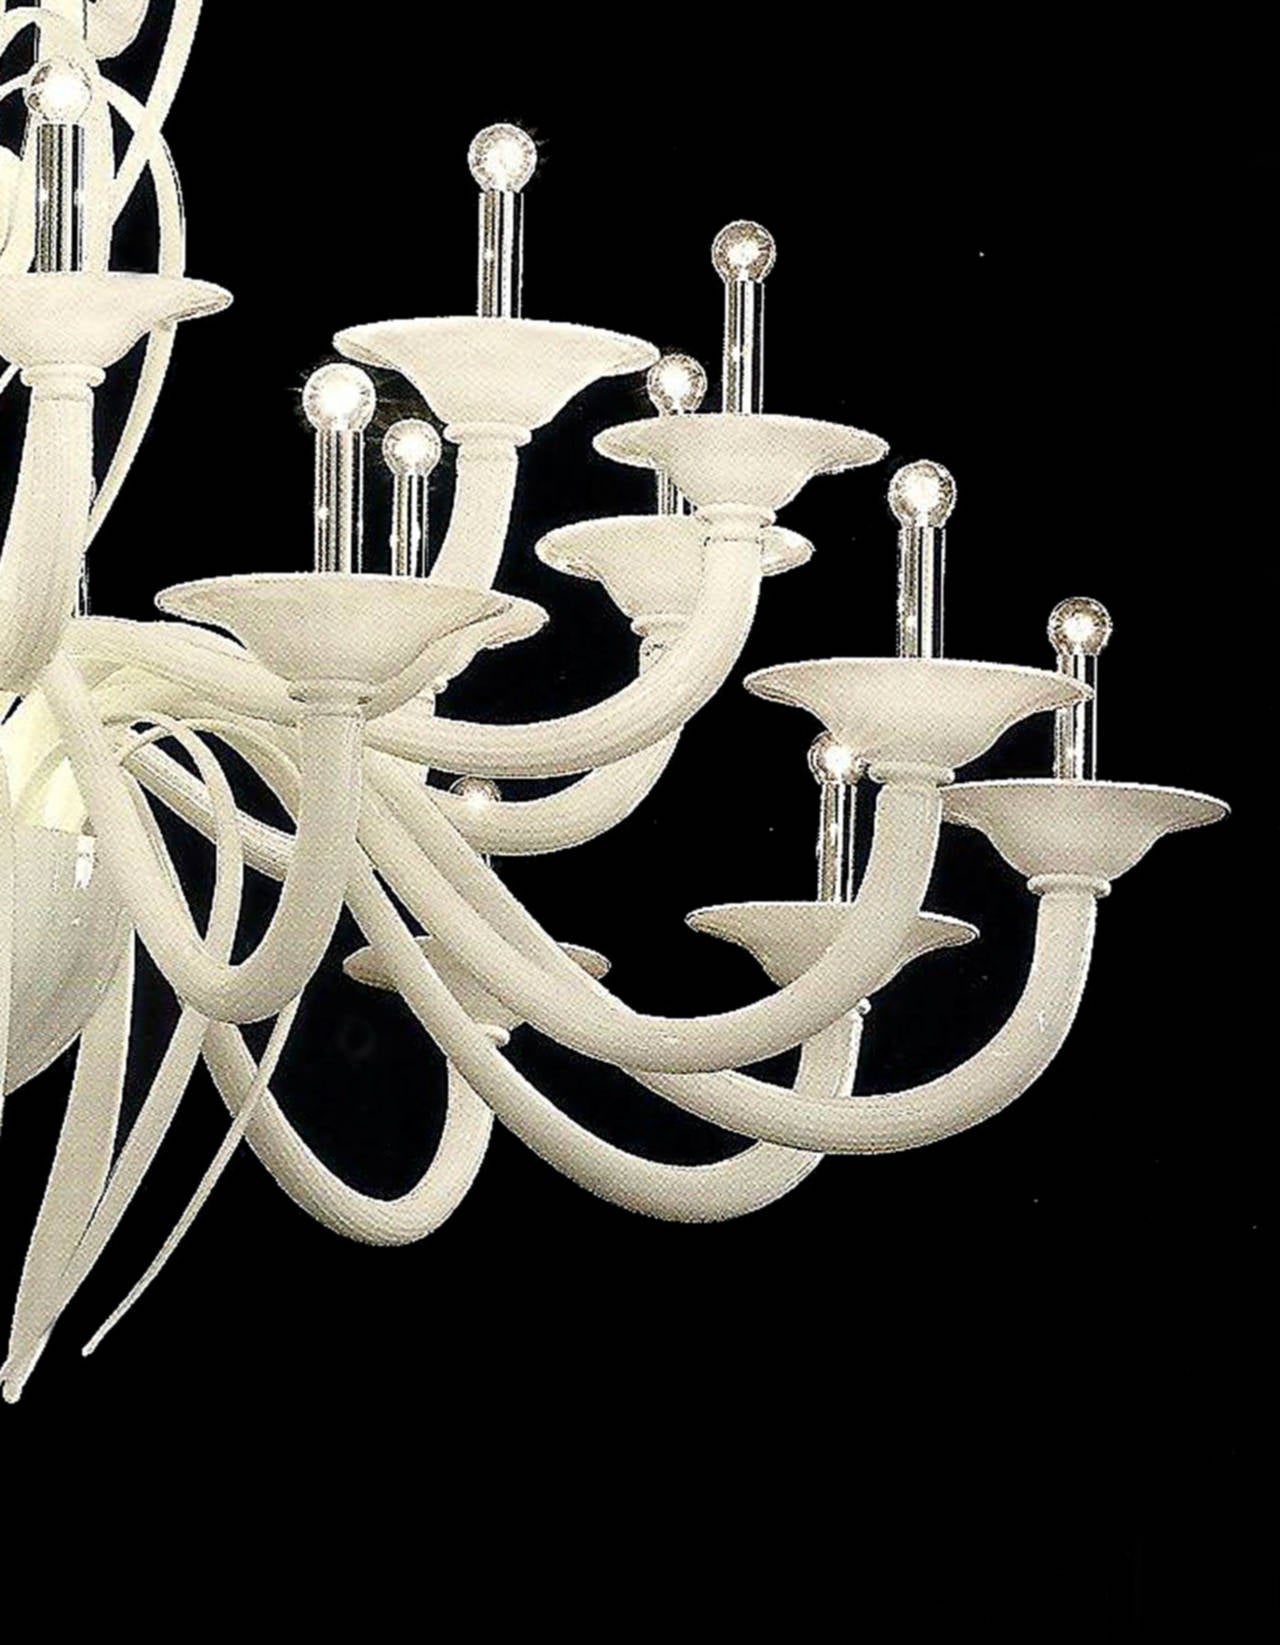 Monumental Mid-Century Modern Neoclassic White Murano /Venetian Glass Chandelier In Excellent Condition For Sale In New York, NY